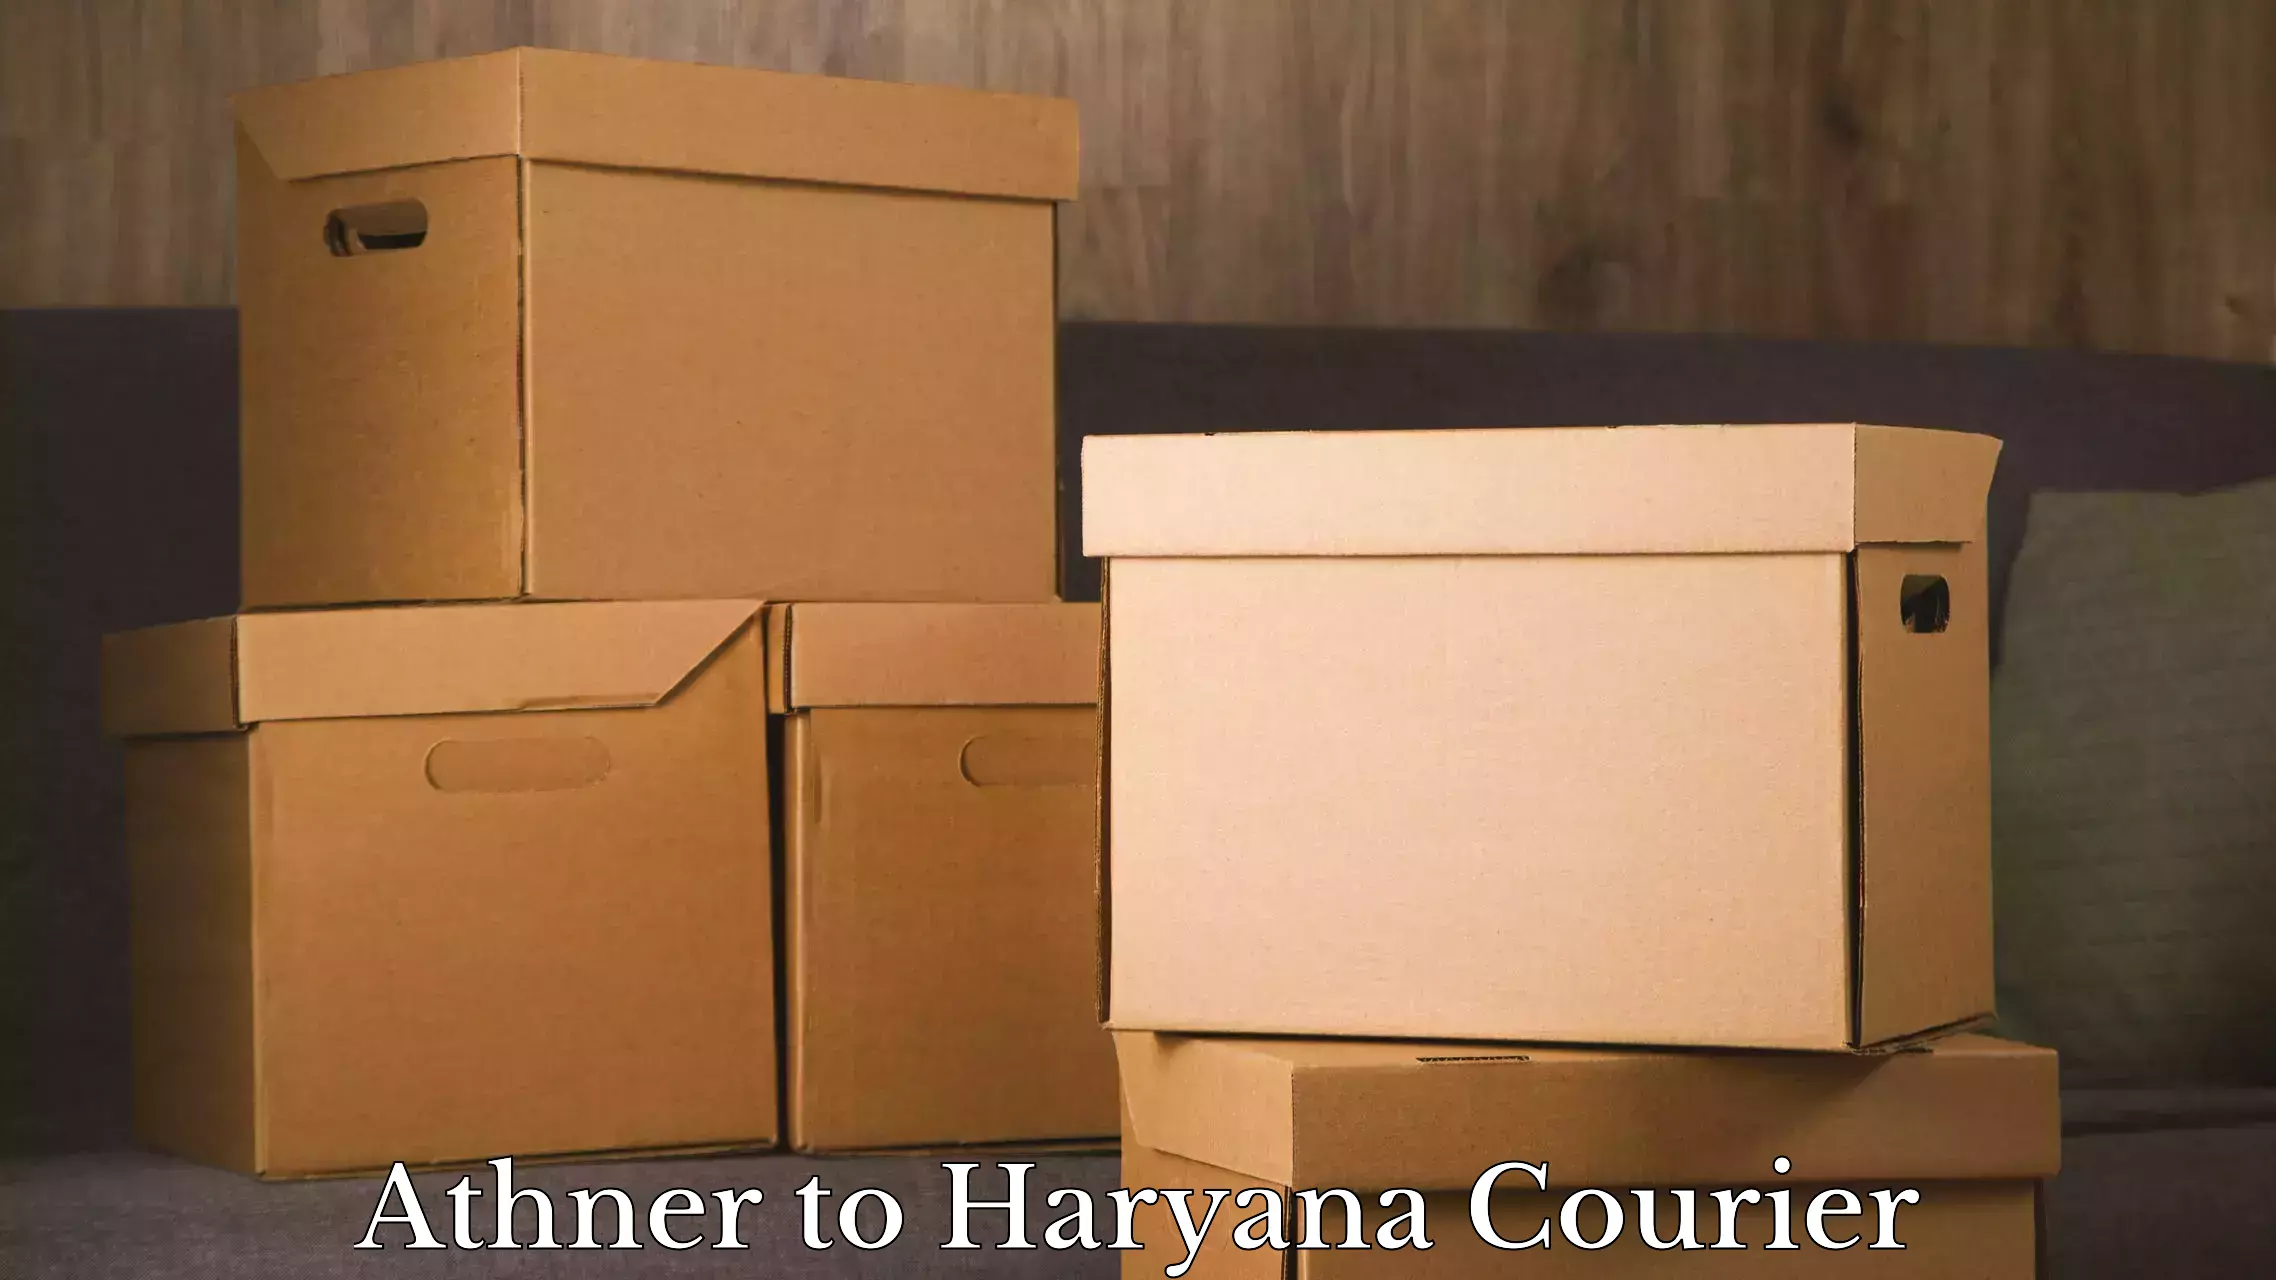 Luggage transport consultancy Athner to Haryana